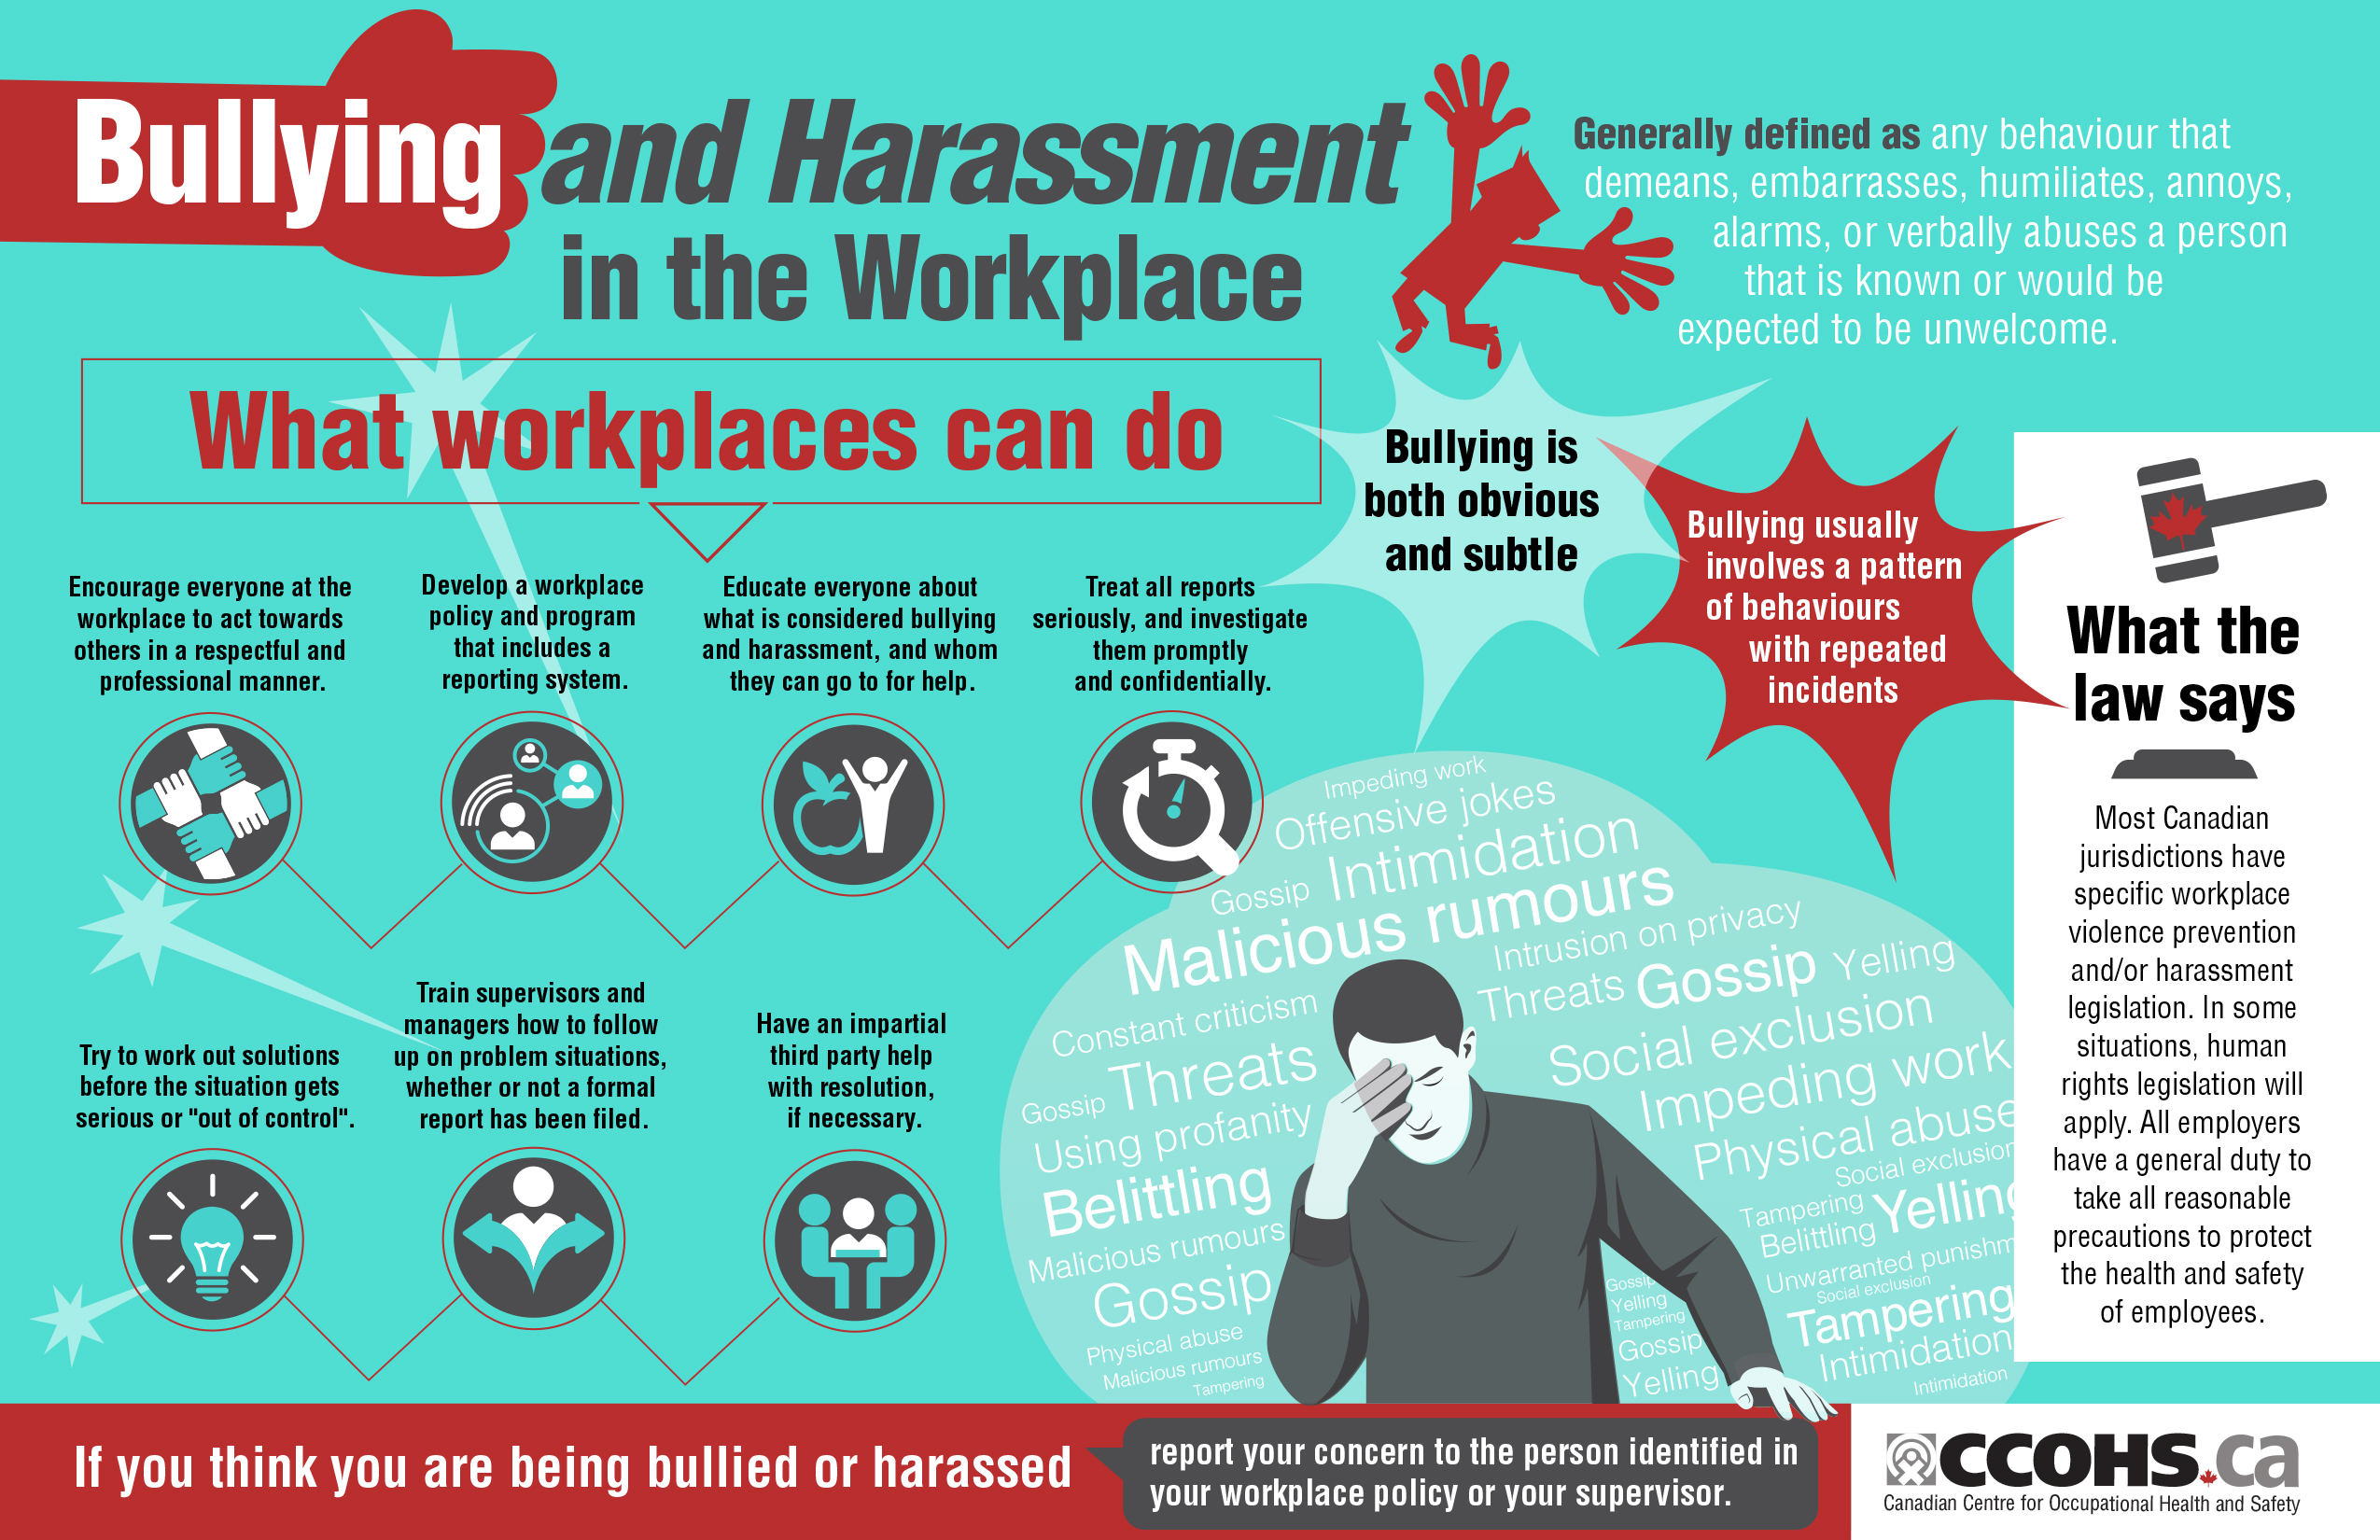 bullying-and-harassment-in-the-workplace-infographic